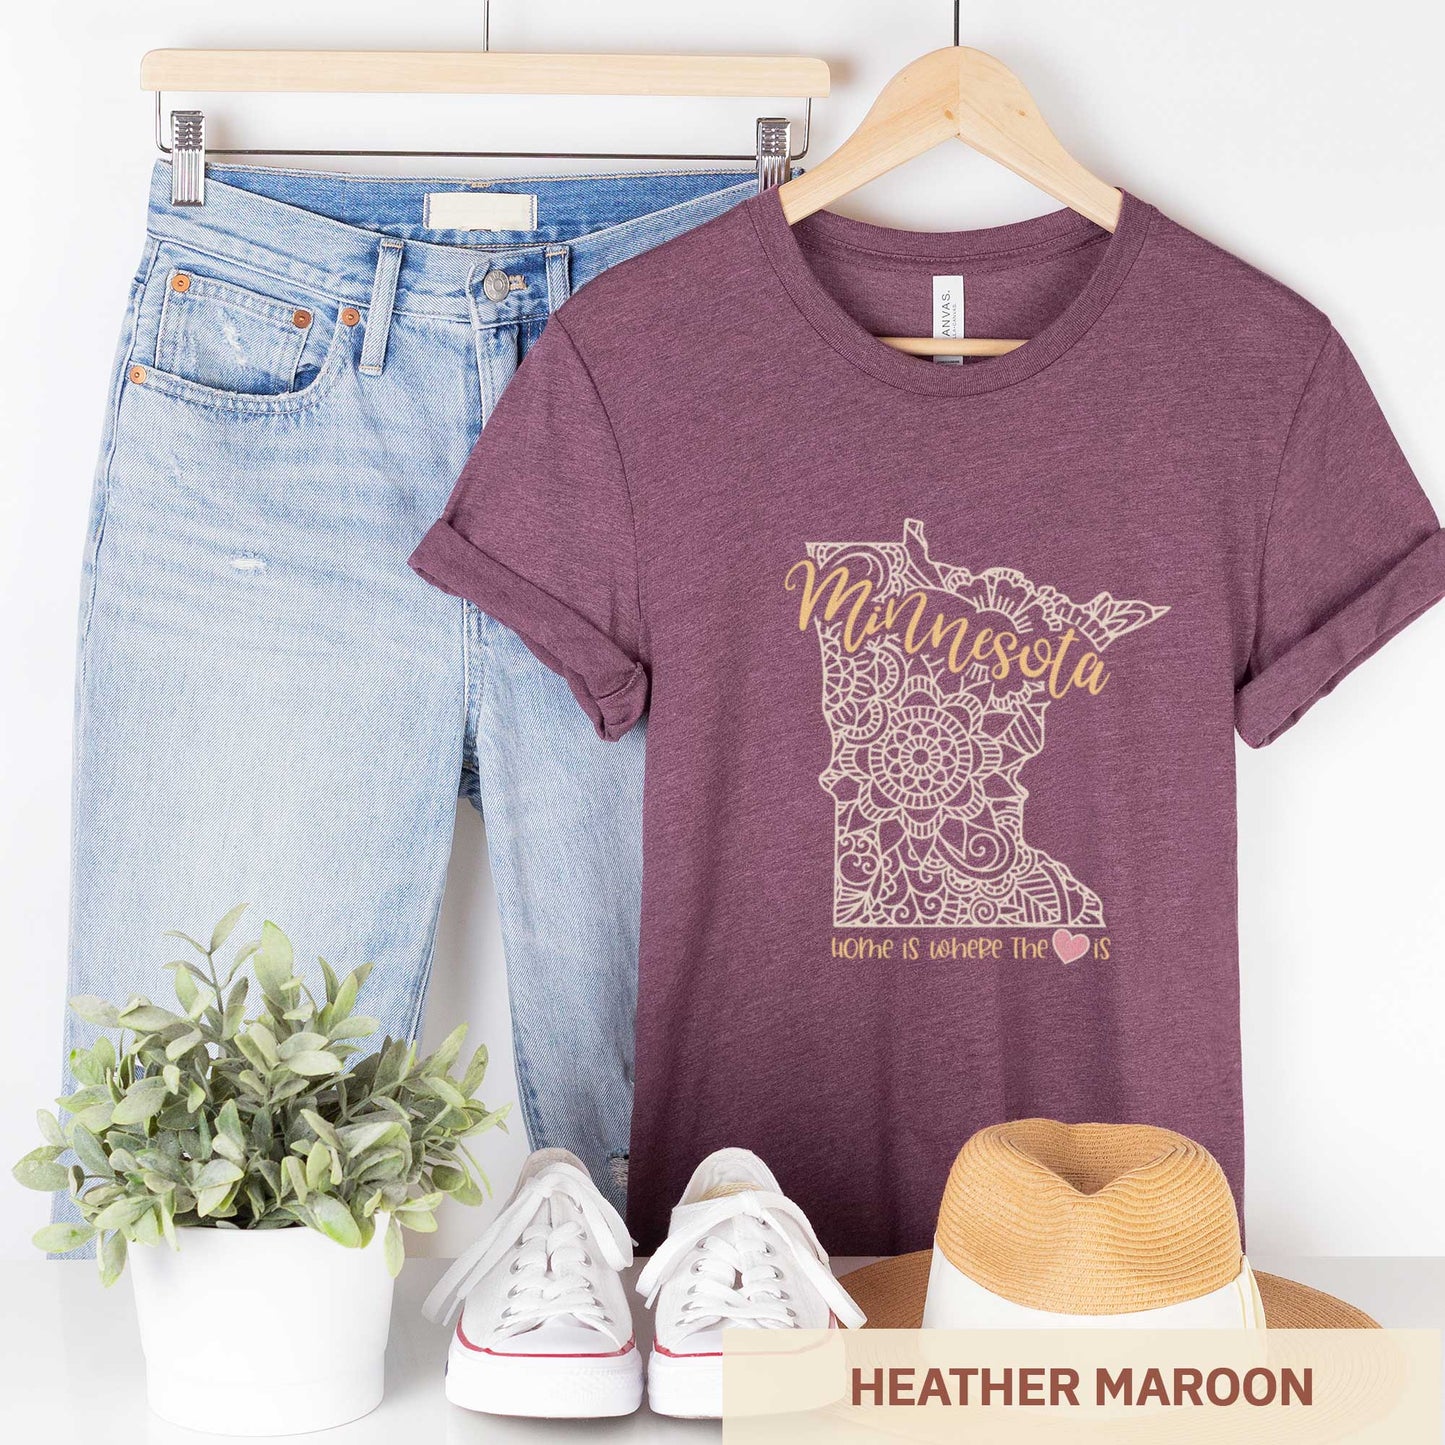 A hanging heather maroon Bella Canvas t-shirt featuring a mandala in the shape of Minnesota with the words home is where the heart is.